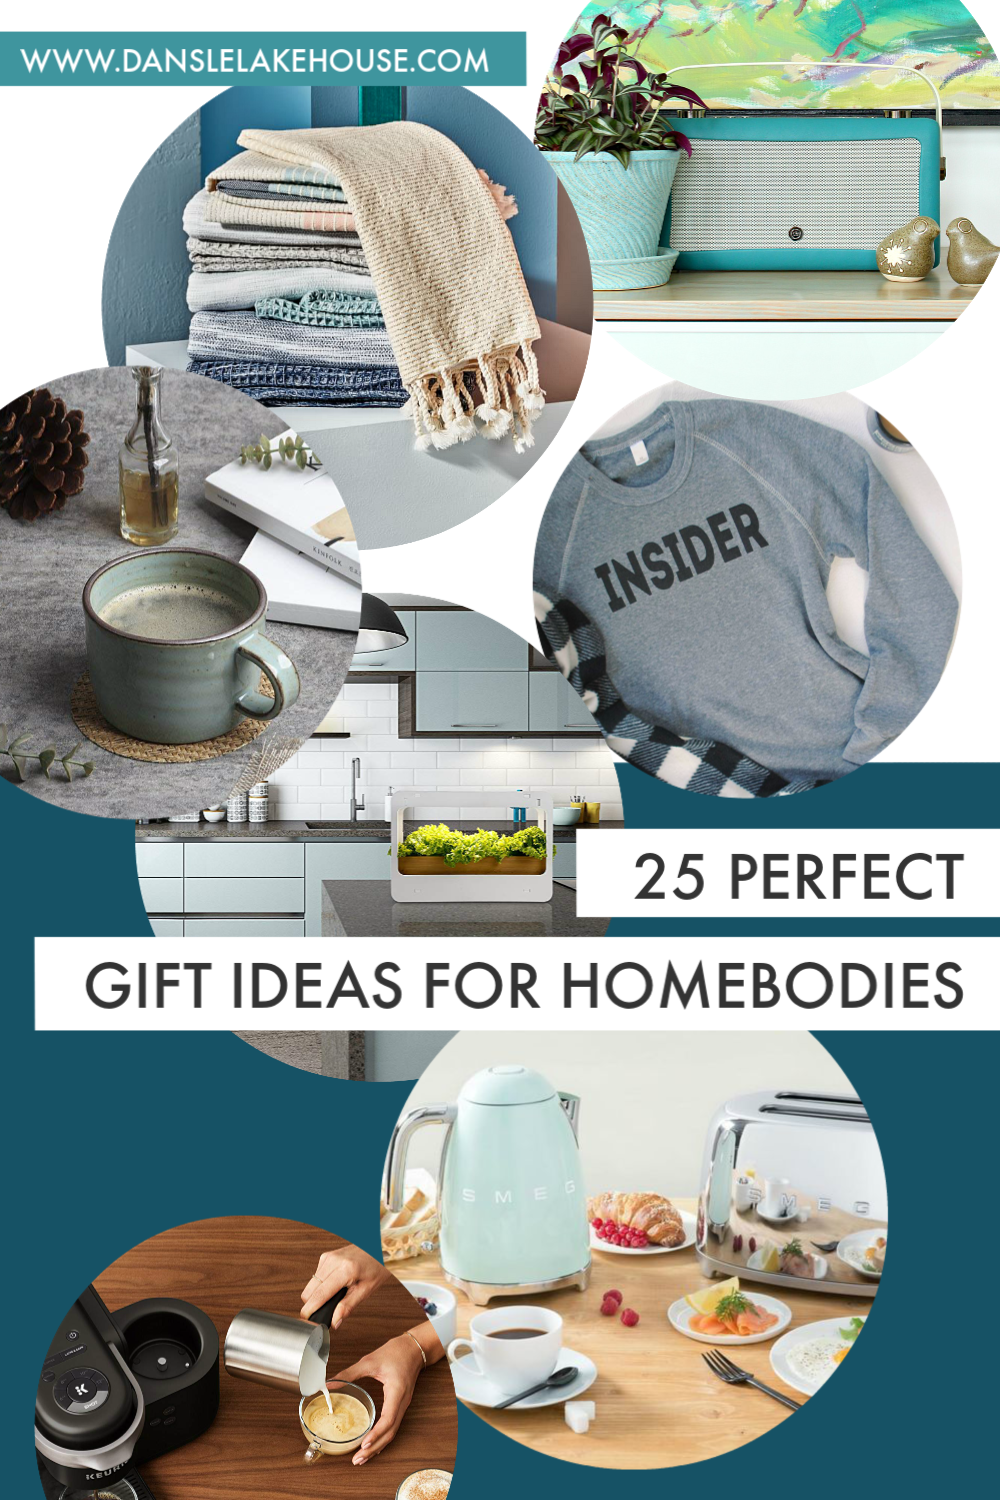 Holiday Gift Guide: 25 Gift Ideas for Homebodies 2018 | Dans le Lakehouse